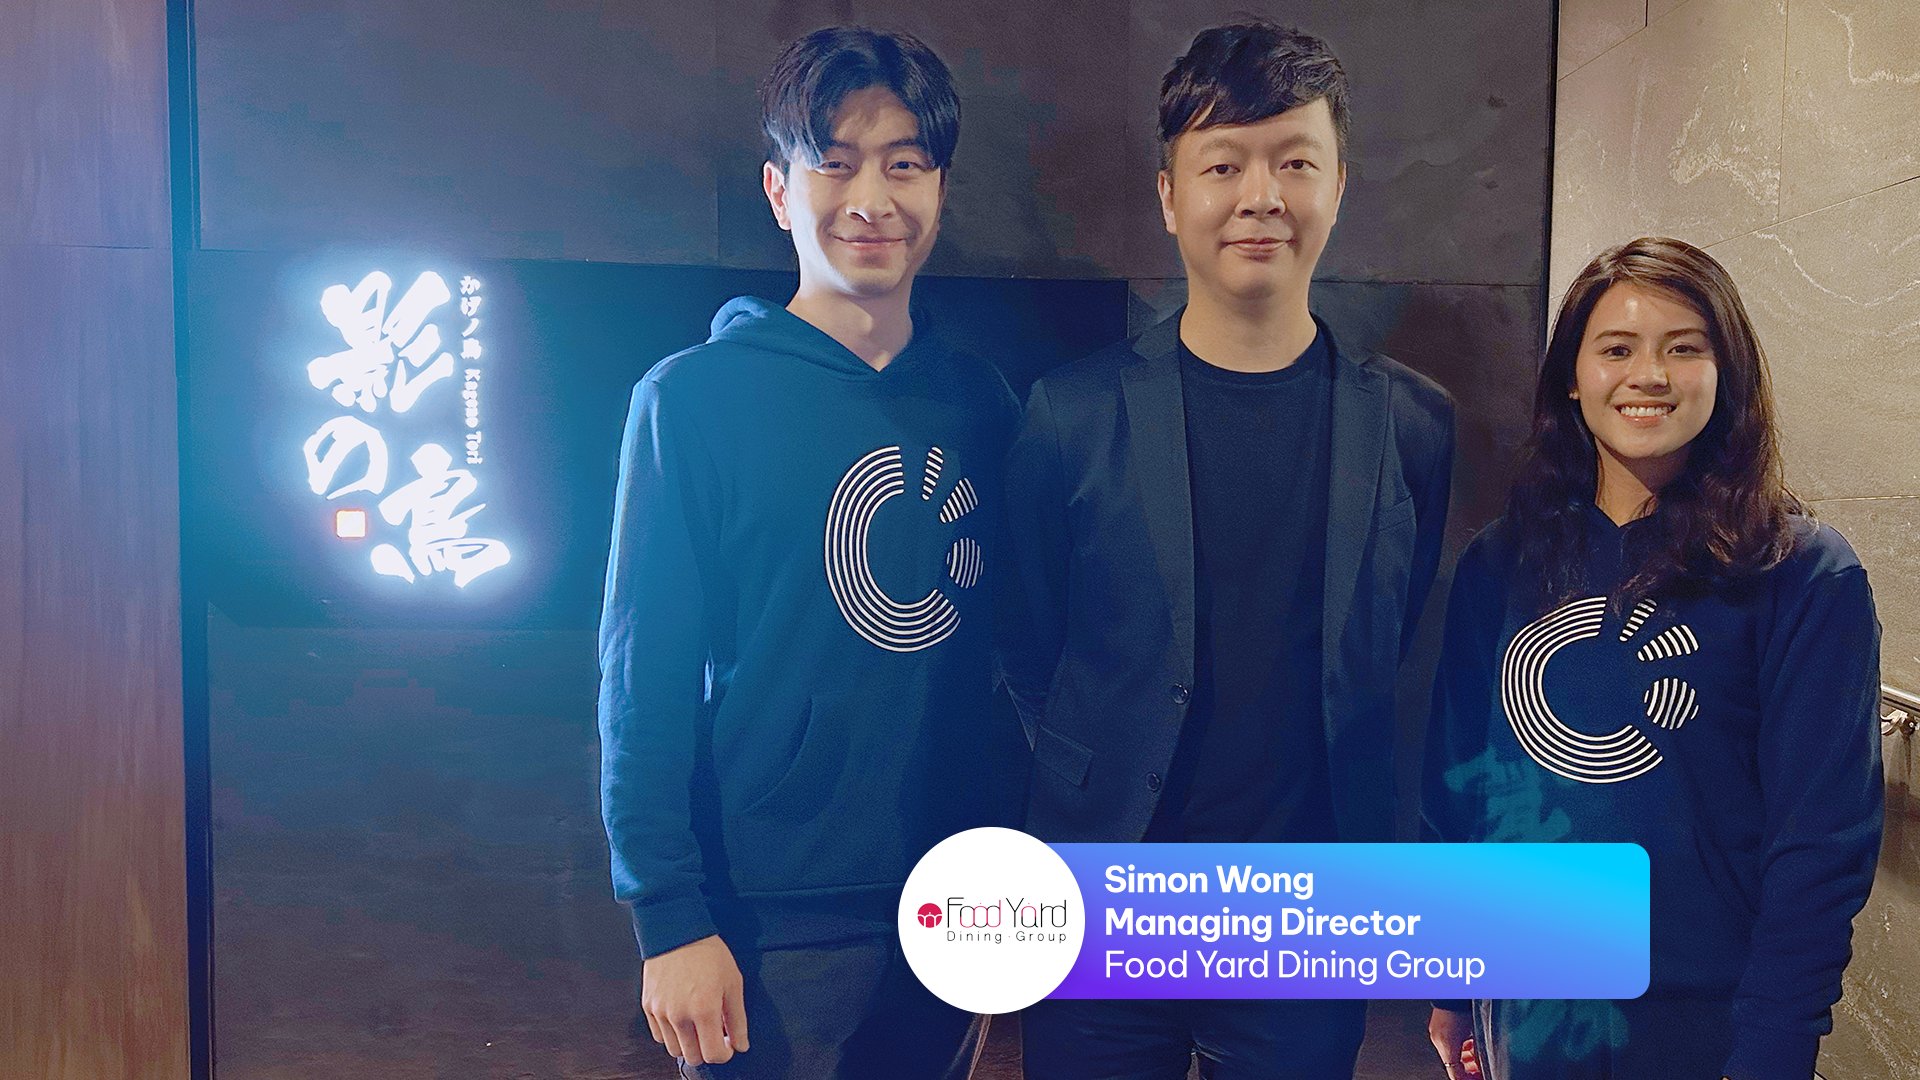 Food Yard Dining Group Interview - Simon